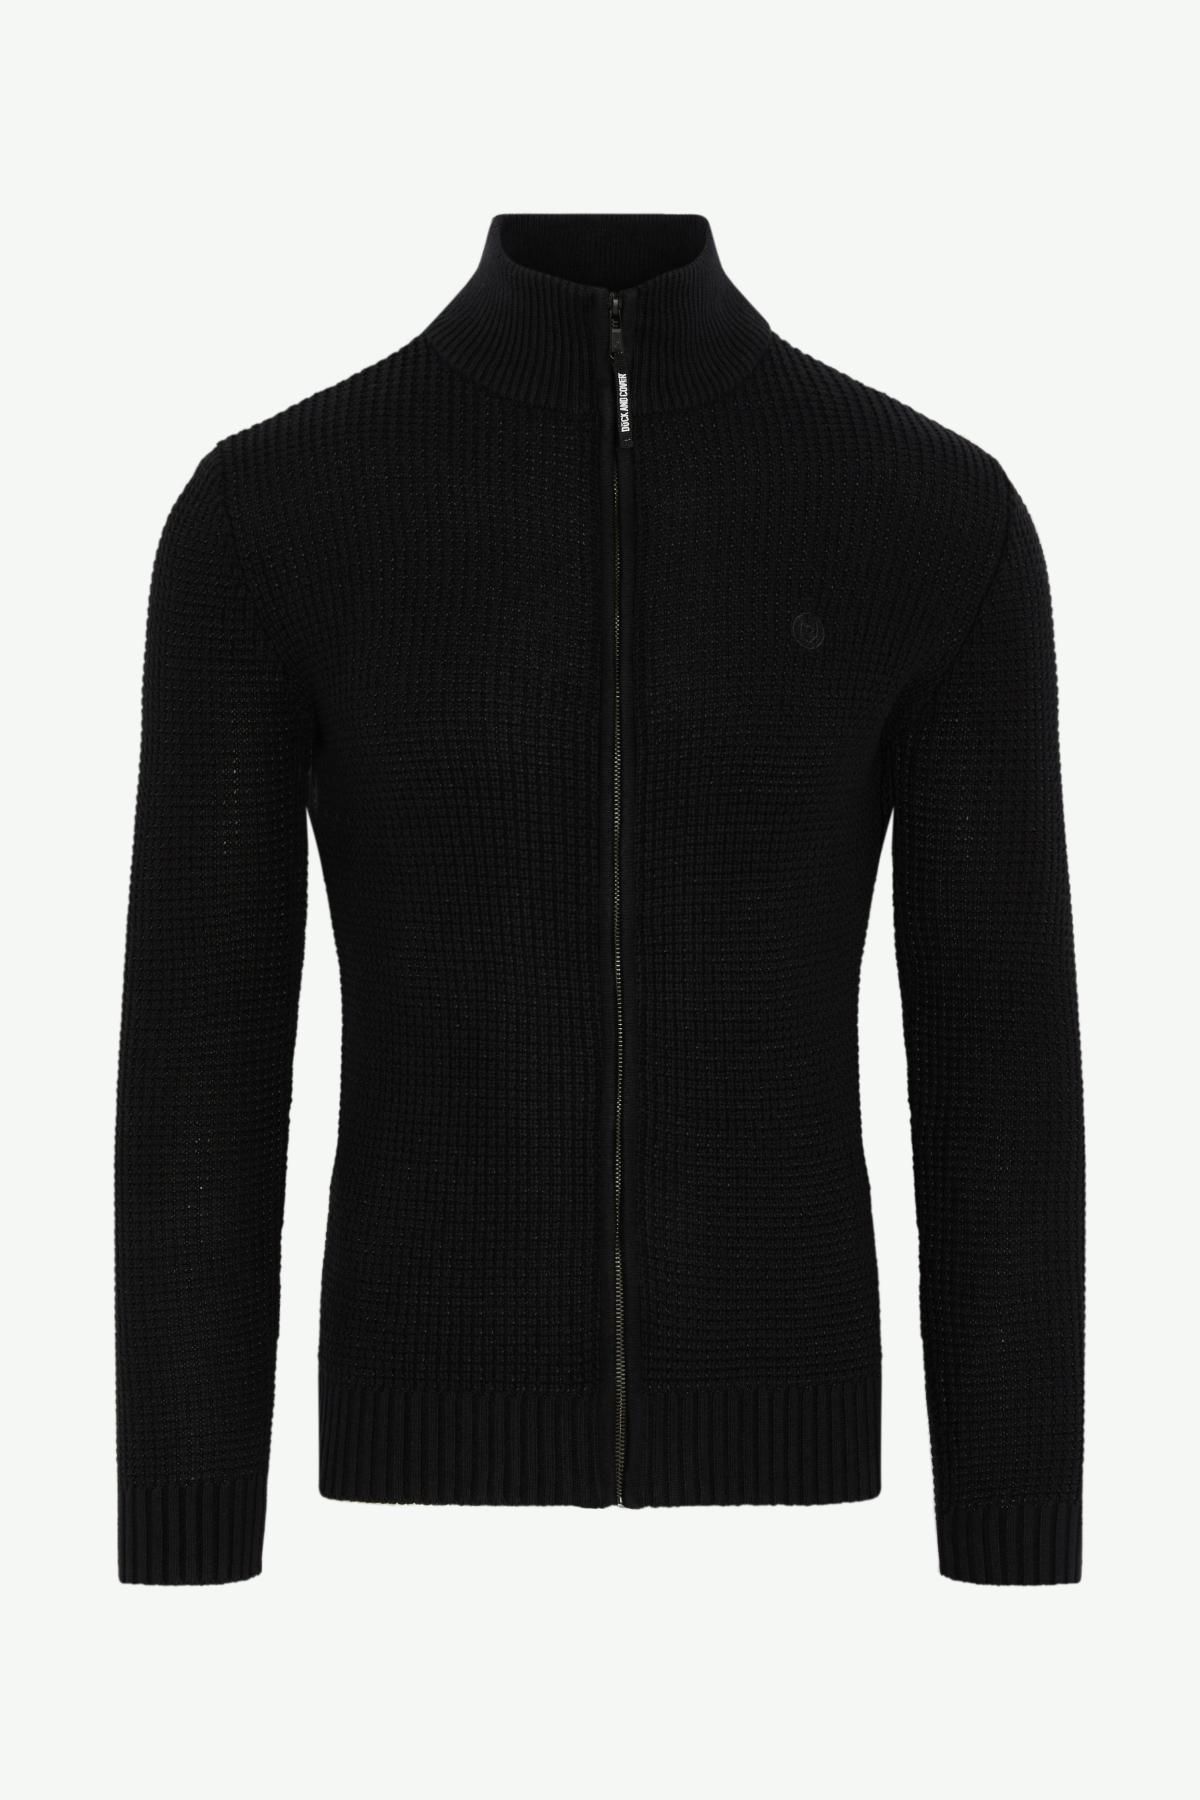 Duck And Cover Mens Knitted Zip Up Jumper Black